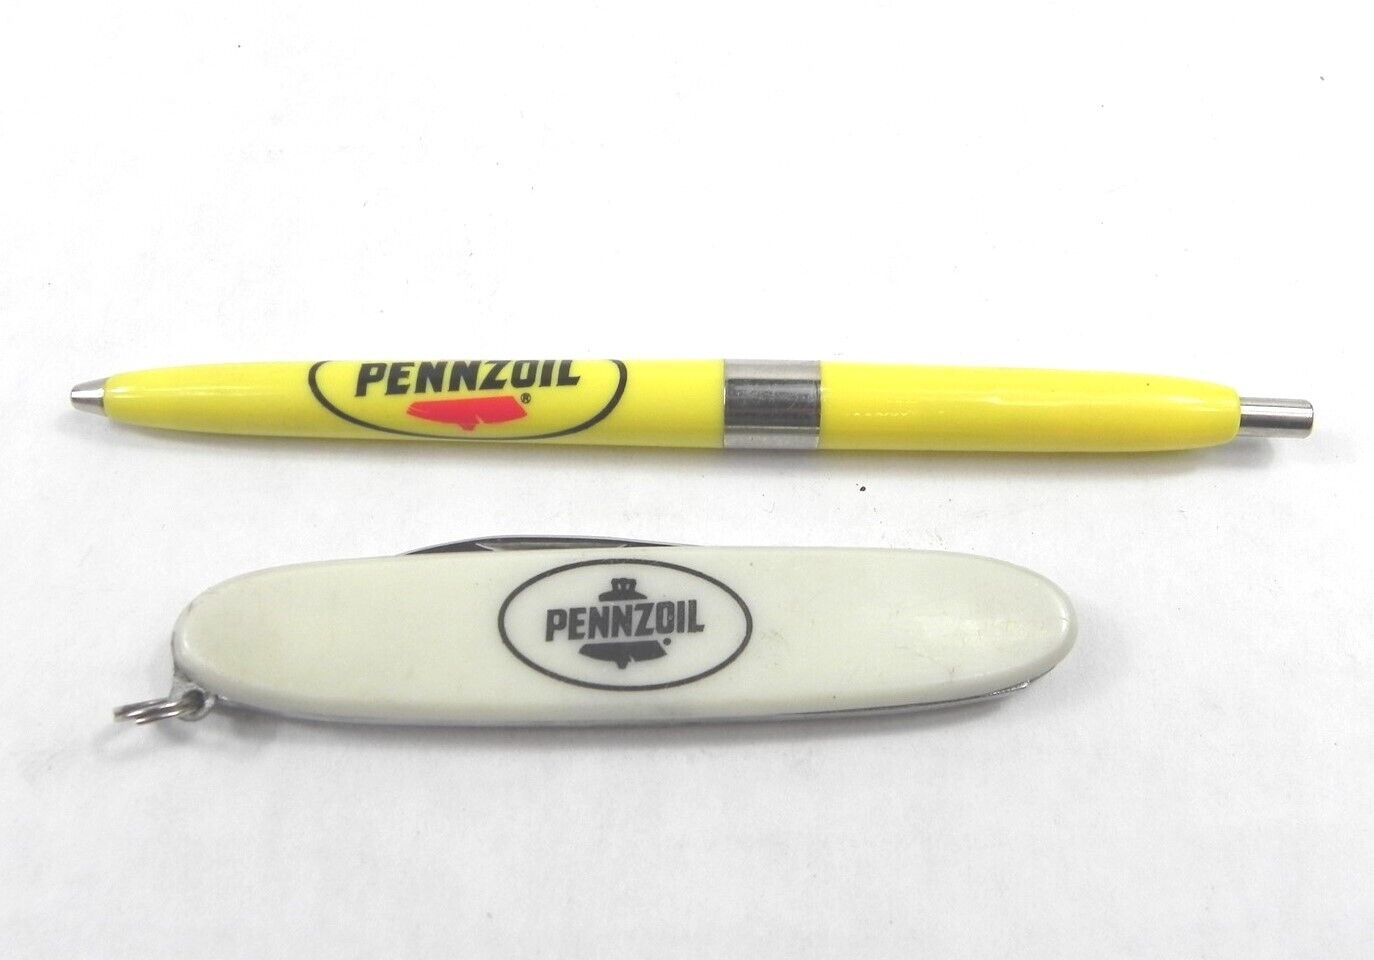 VINTAGE PENNZOIL BALLPOINT PEN AND A 2 BLADE POCKET KNIFE USED SOLD TOGETHER 